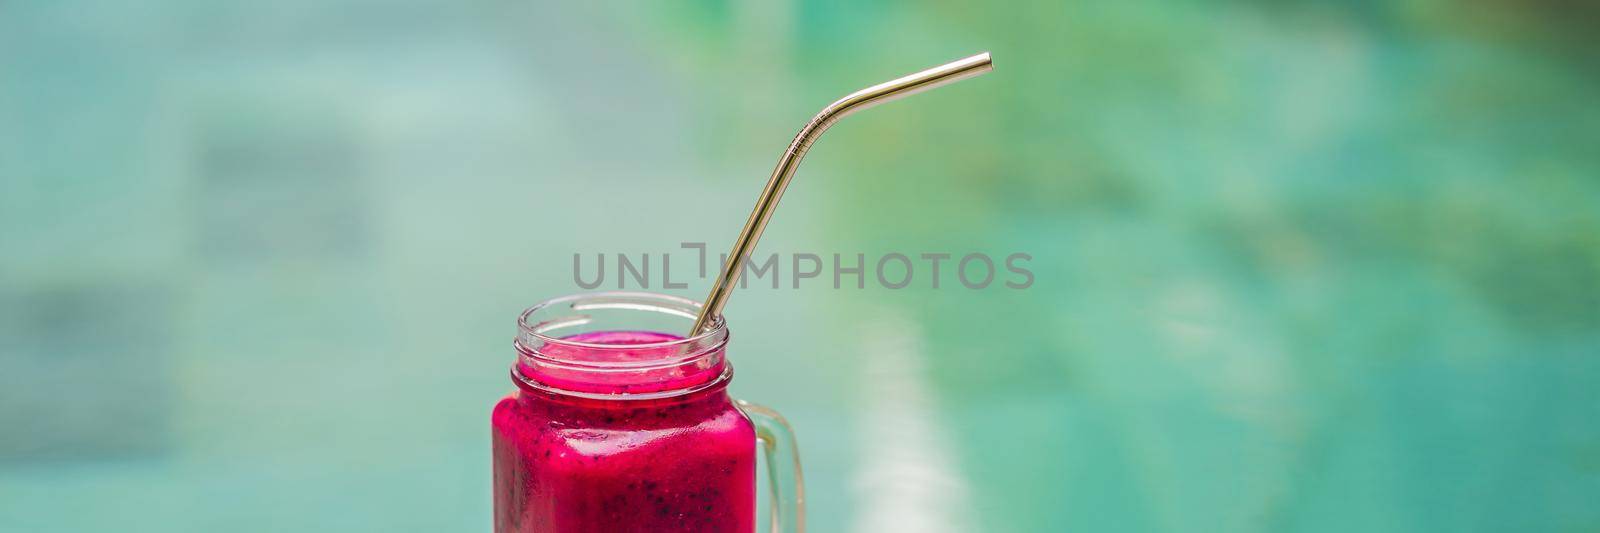 Dragon fruit smoothie with steel drinking straw on pool background. BANNER, LONG FORMAT